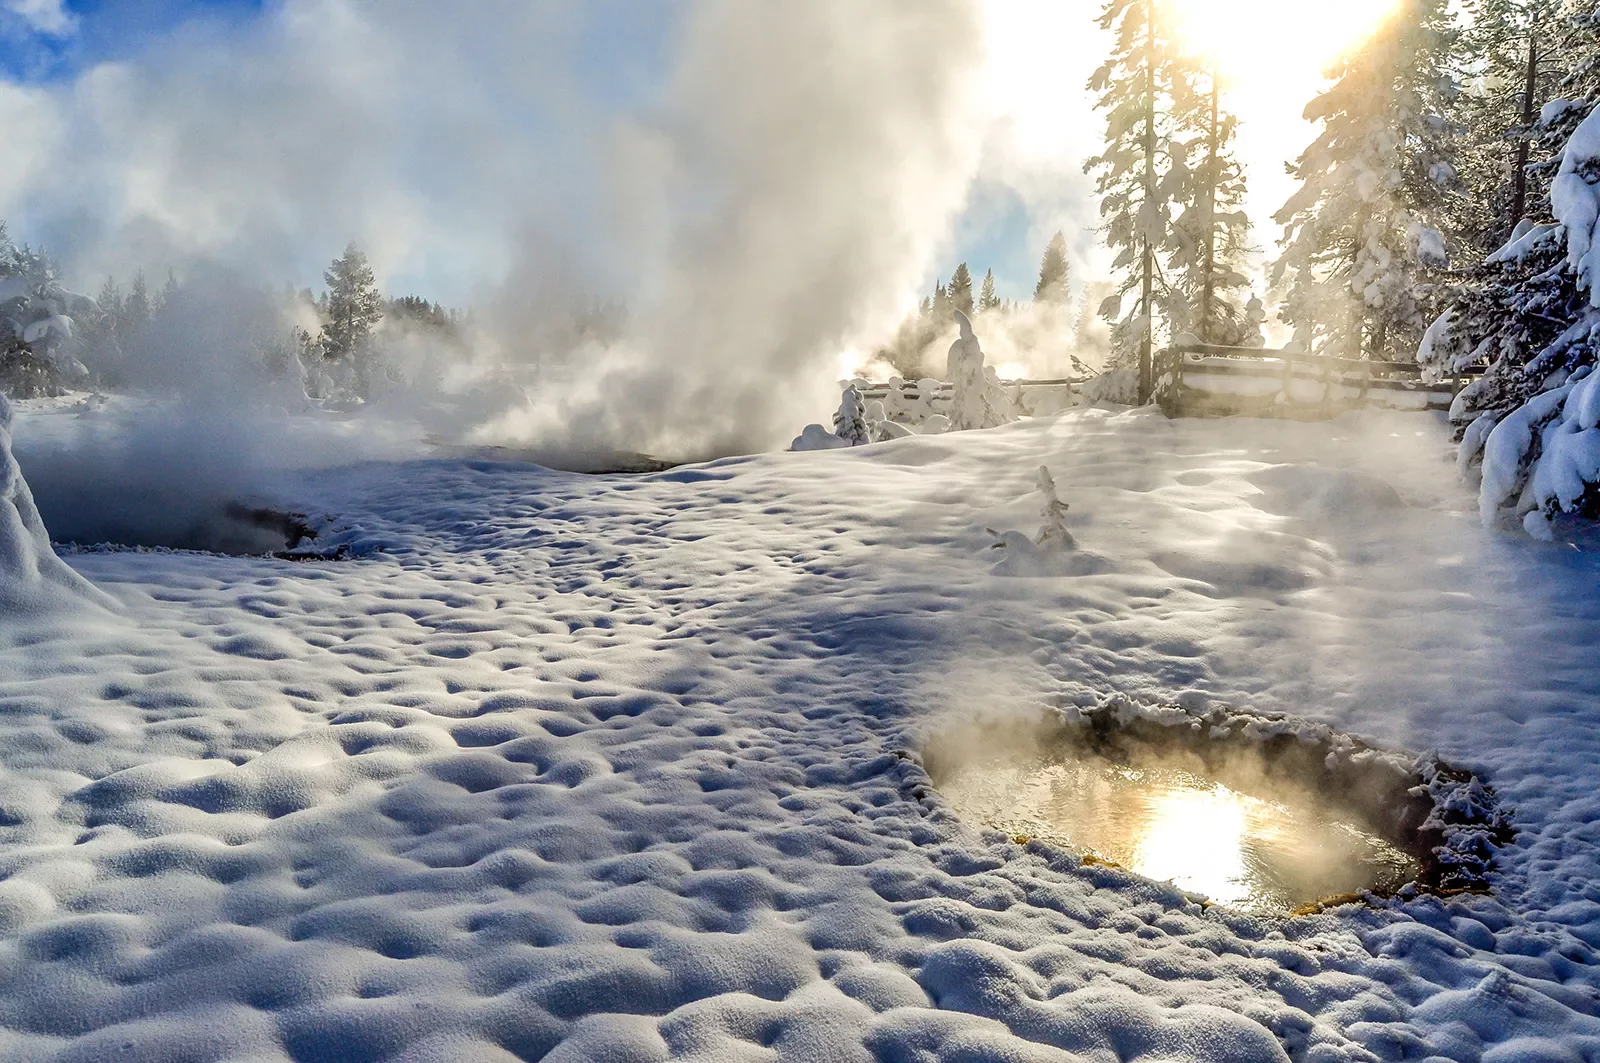 Snow covered landscape and hot springs with steam